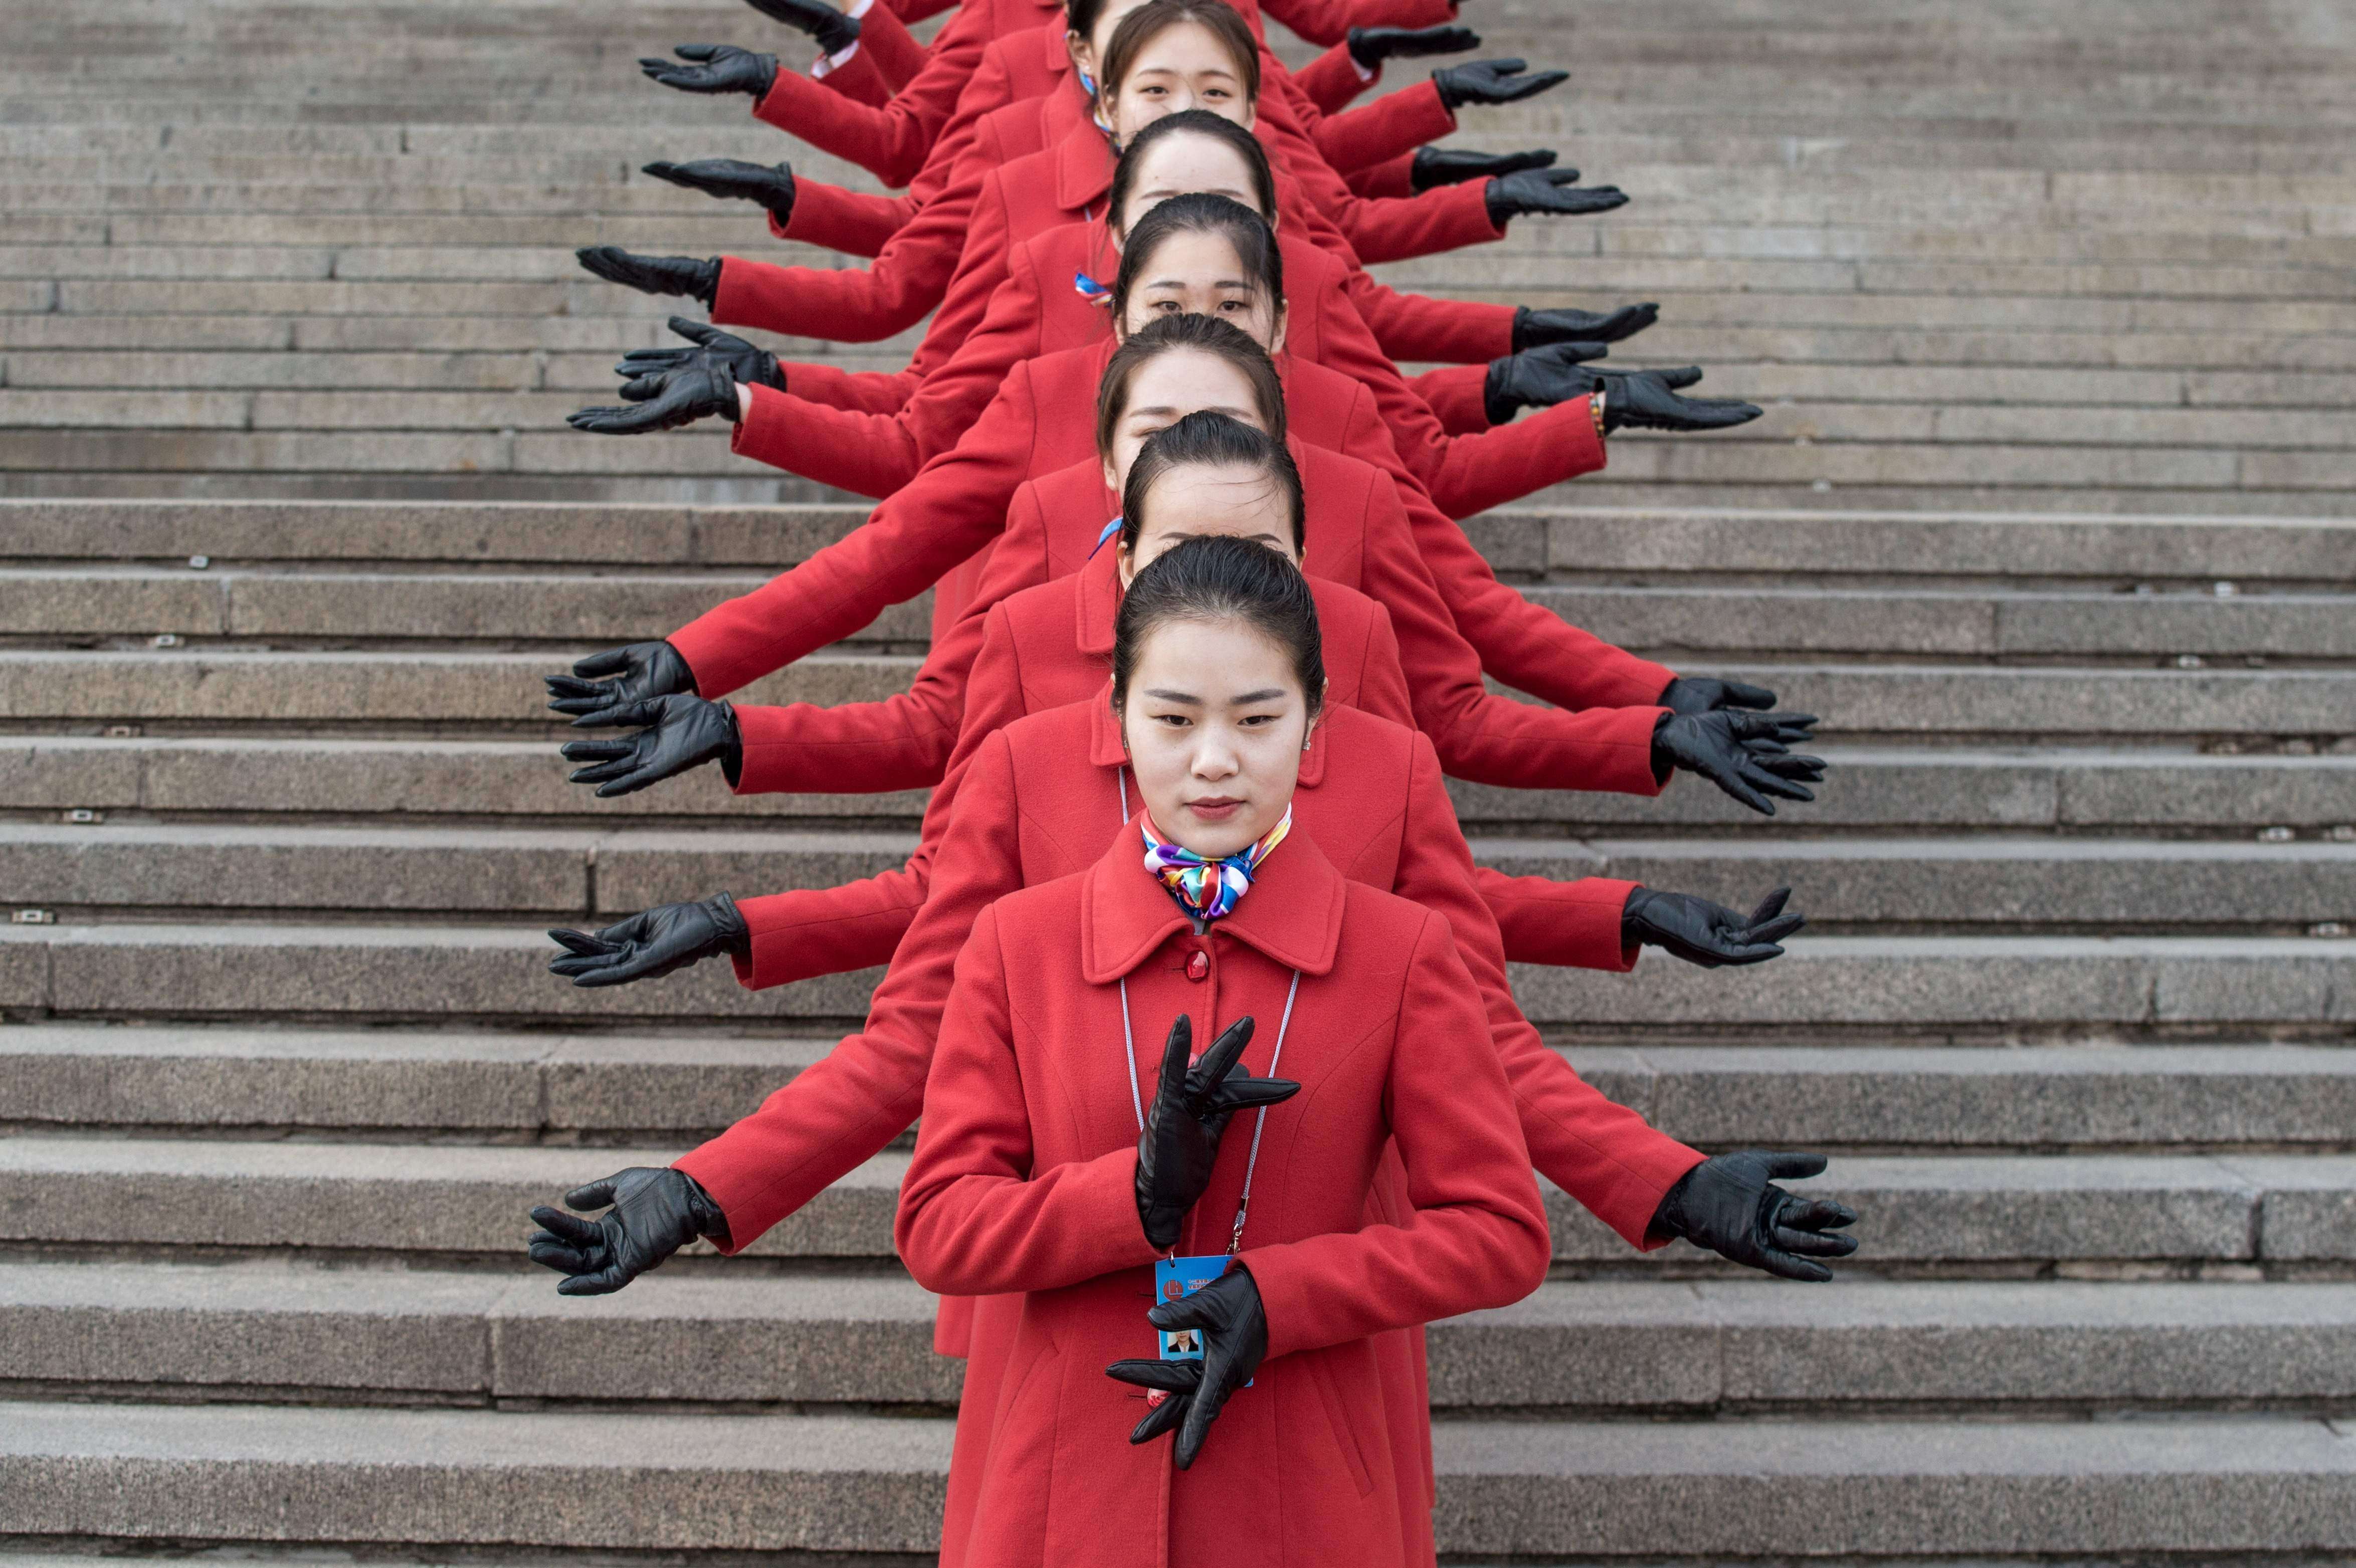 Hostesses pose during the opening session of the Chinese People's Political Consultative Conference (CPPCC) in the Great Hall of the People in Beijing. Photo: AFP